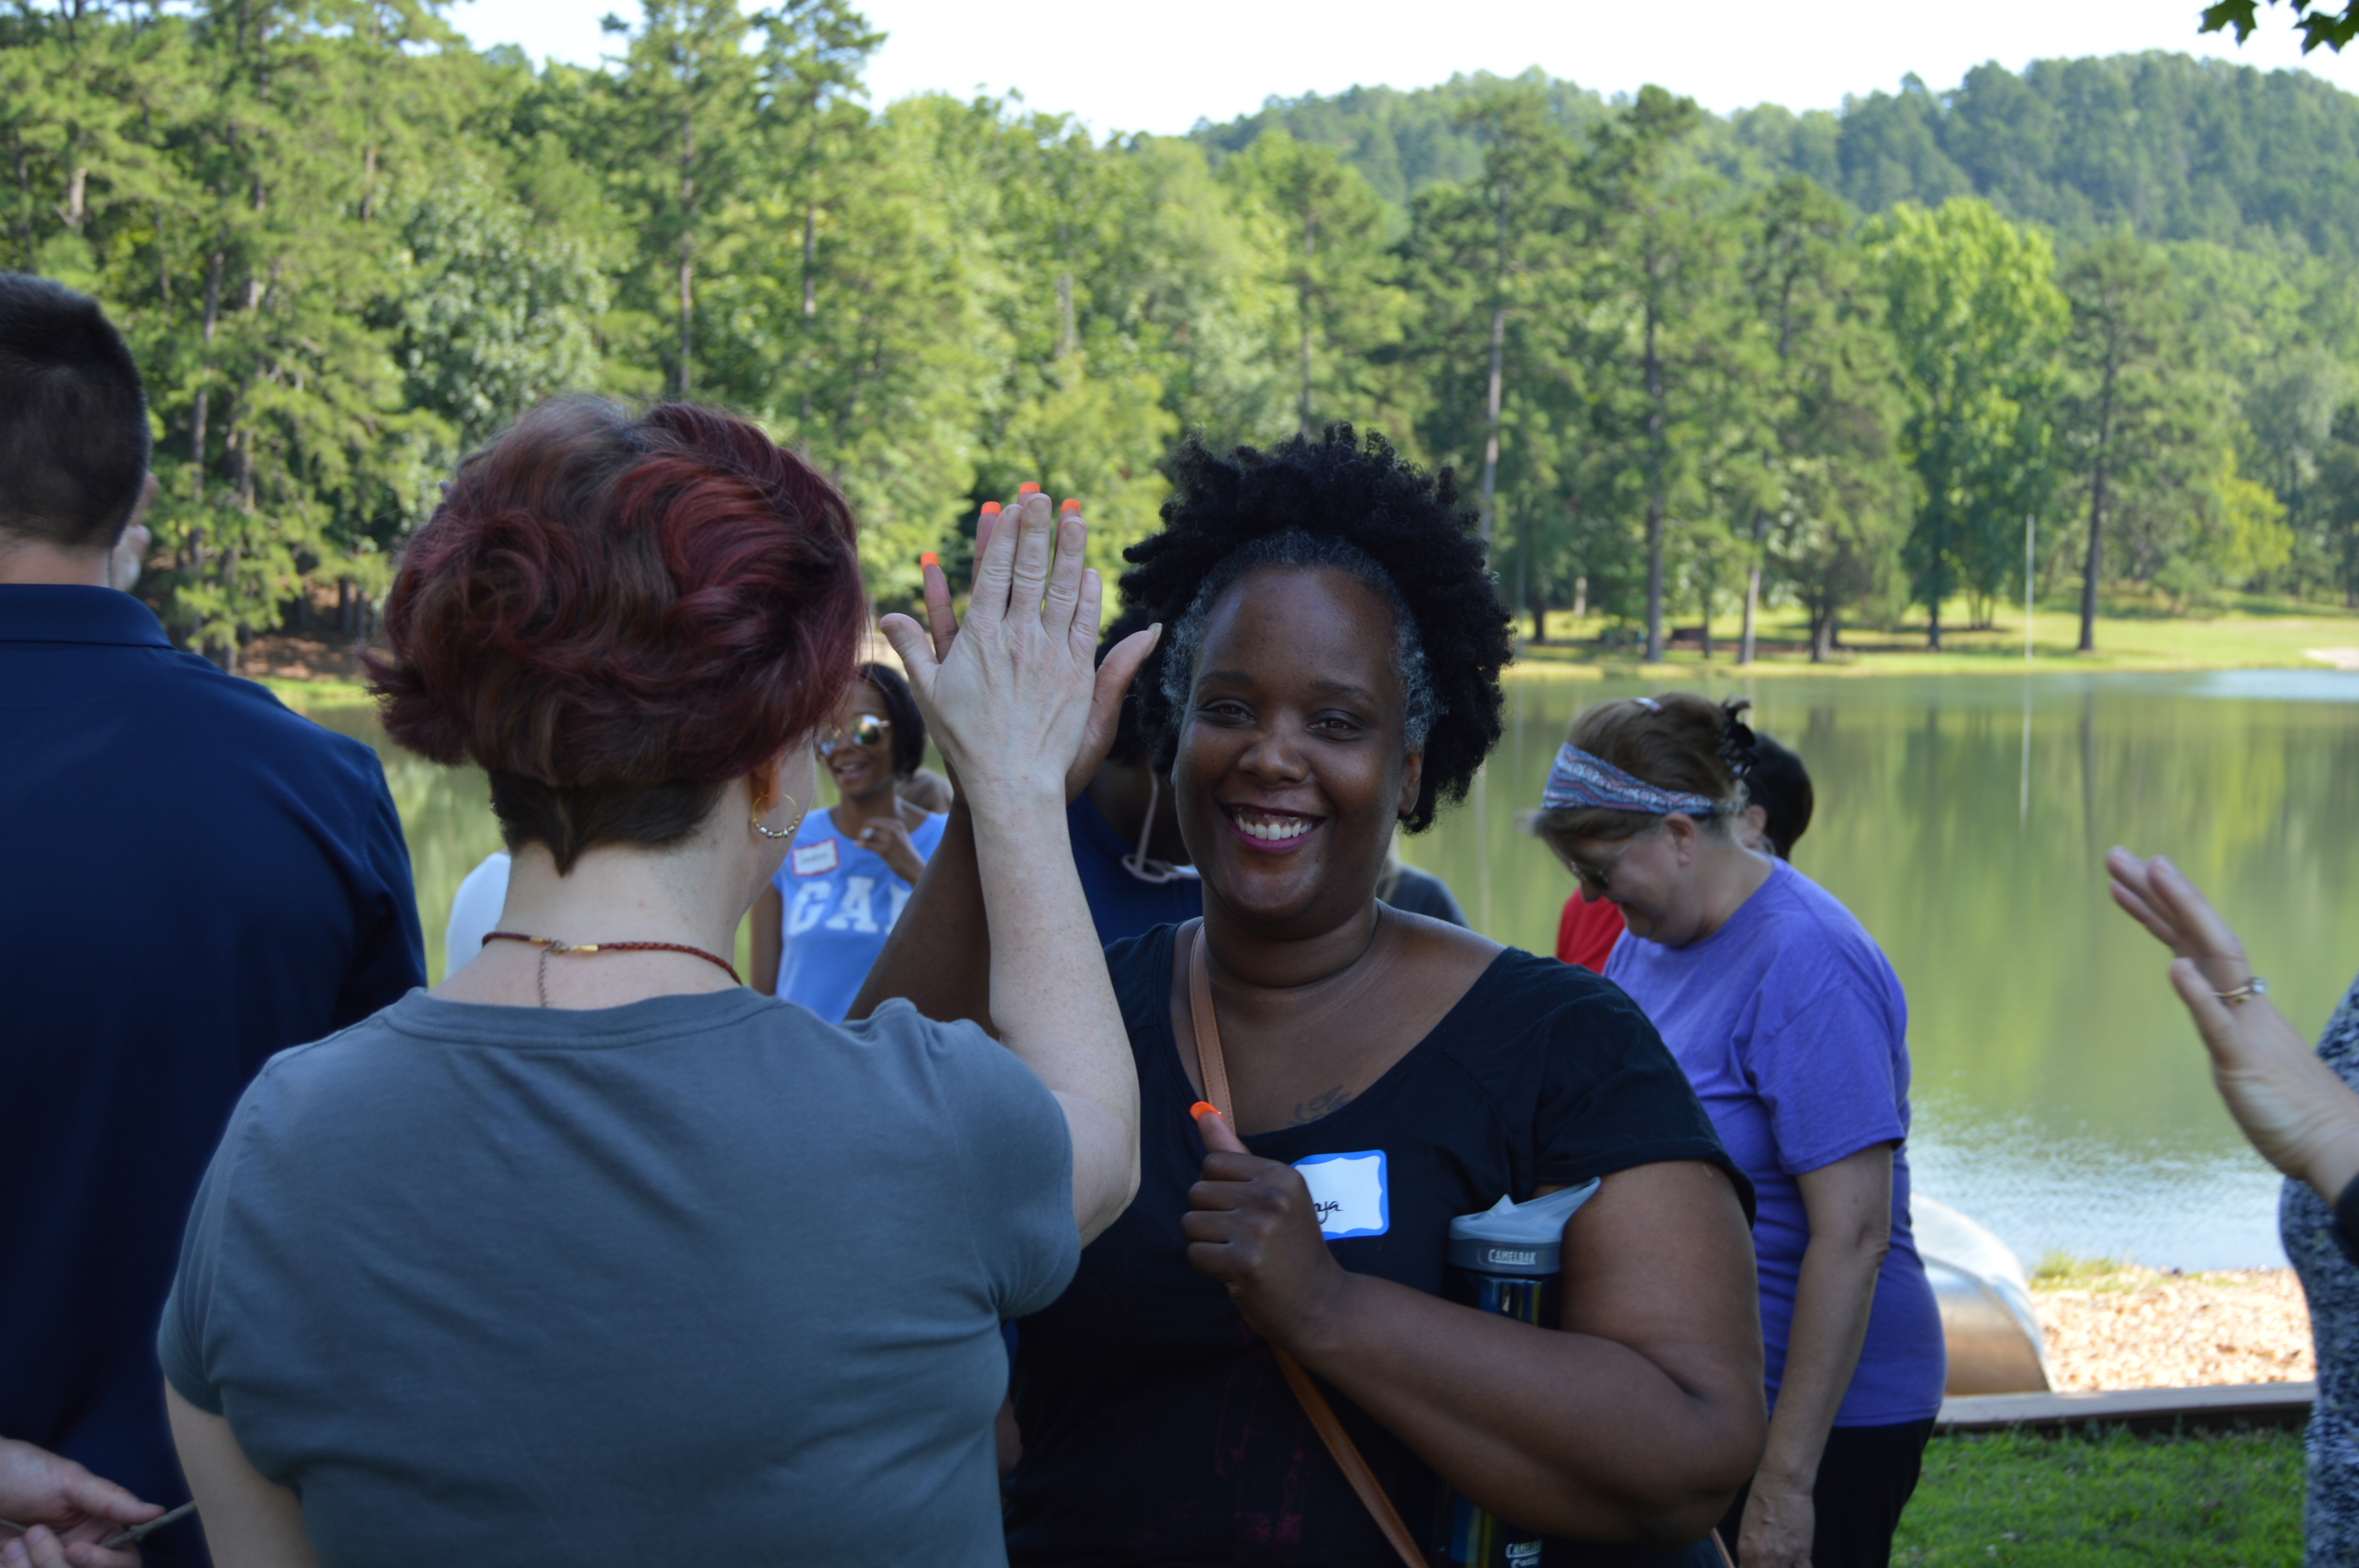 Participants giving a high five during activity